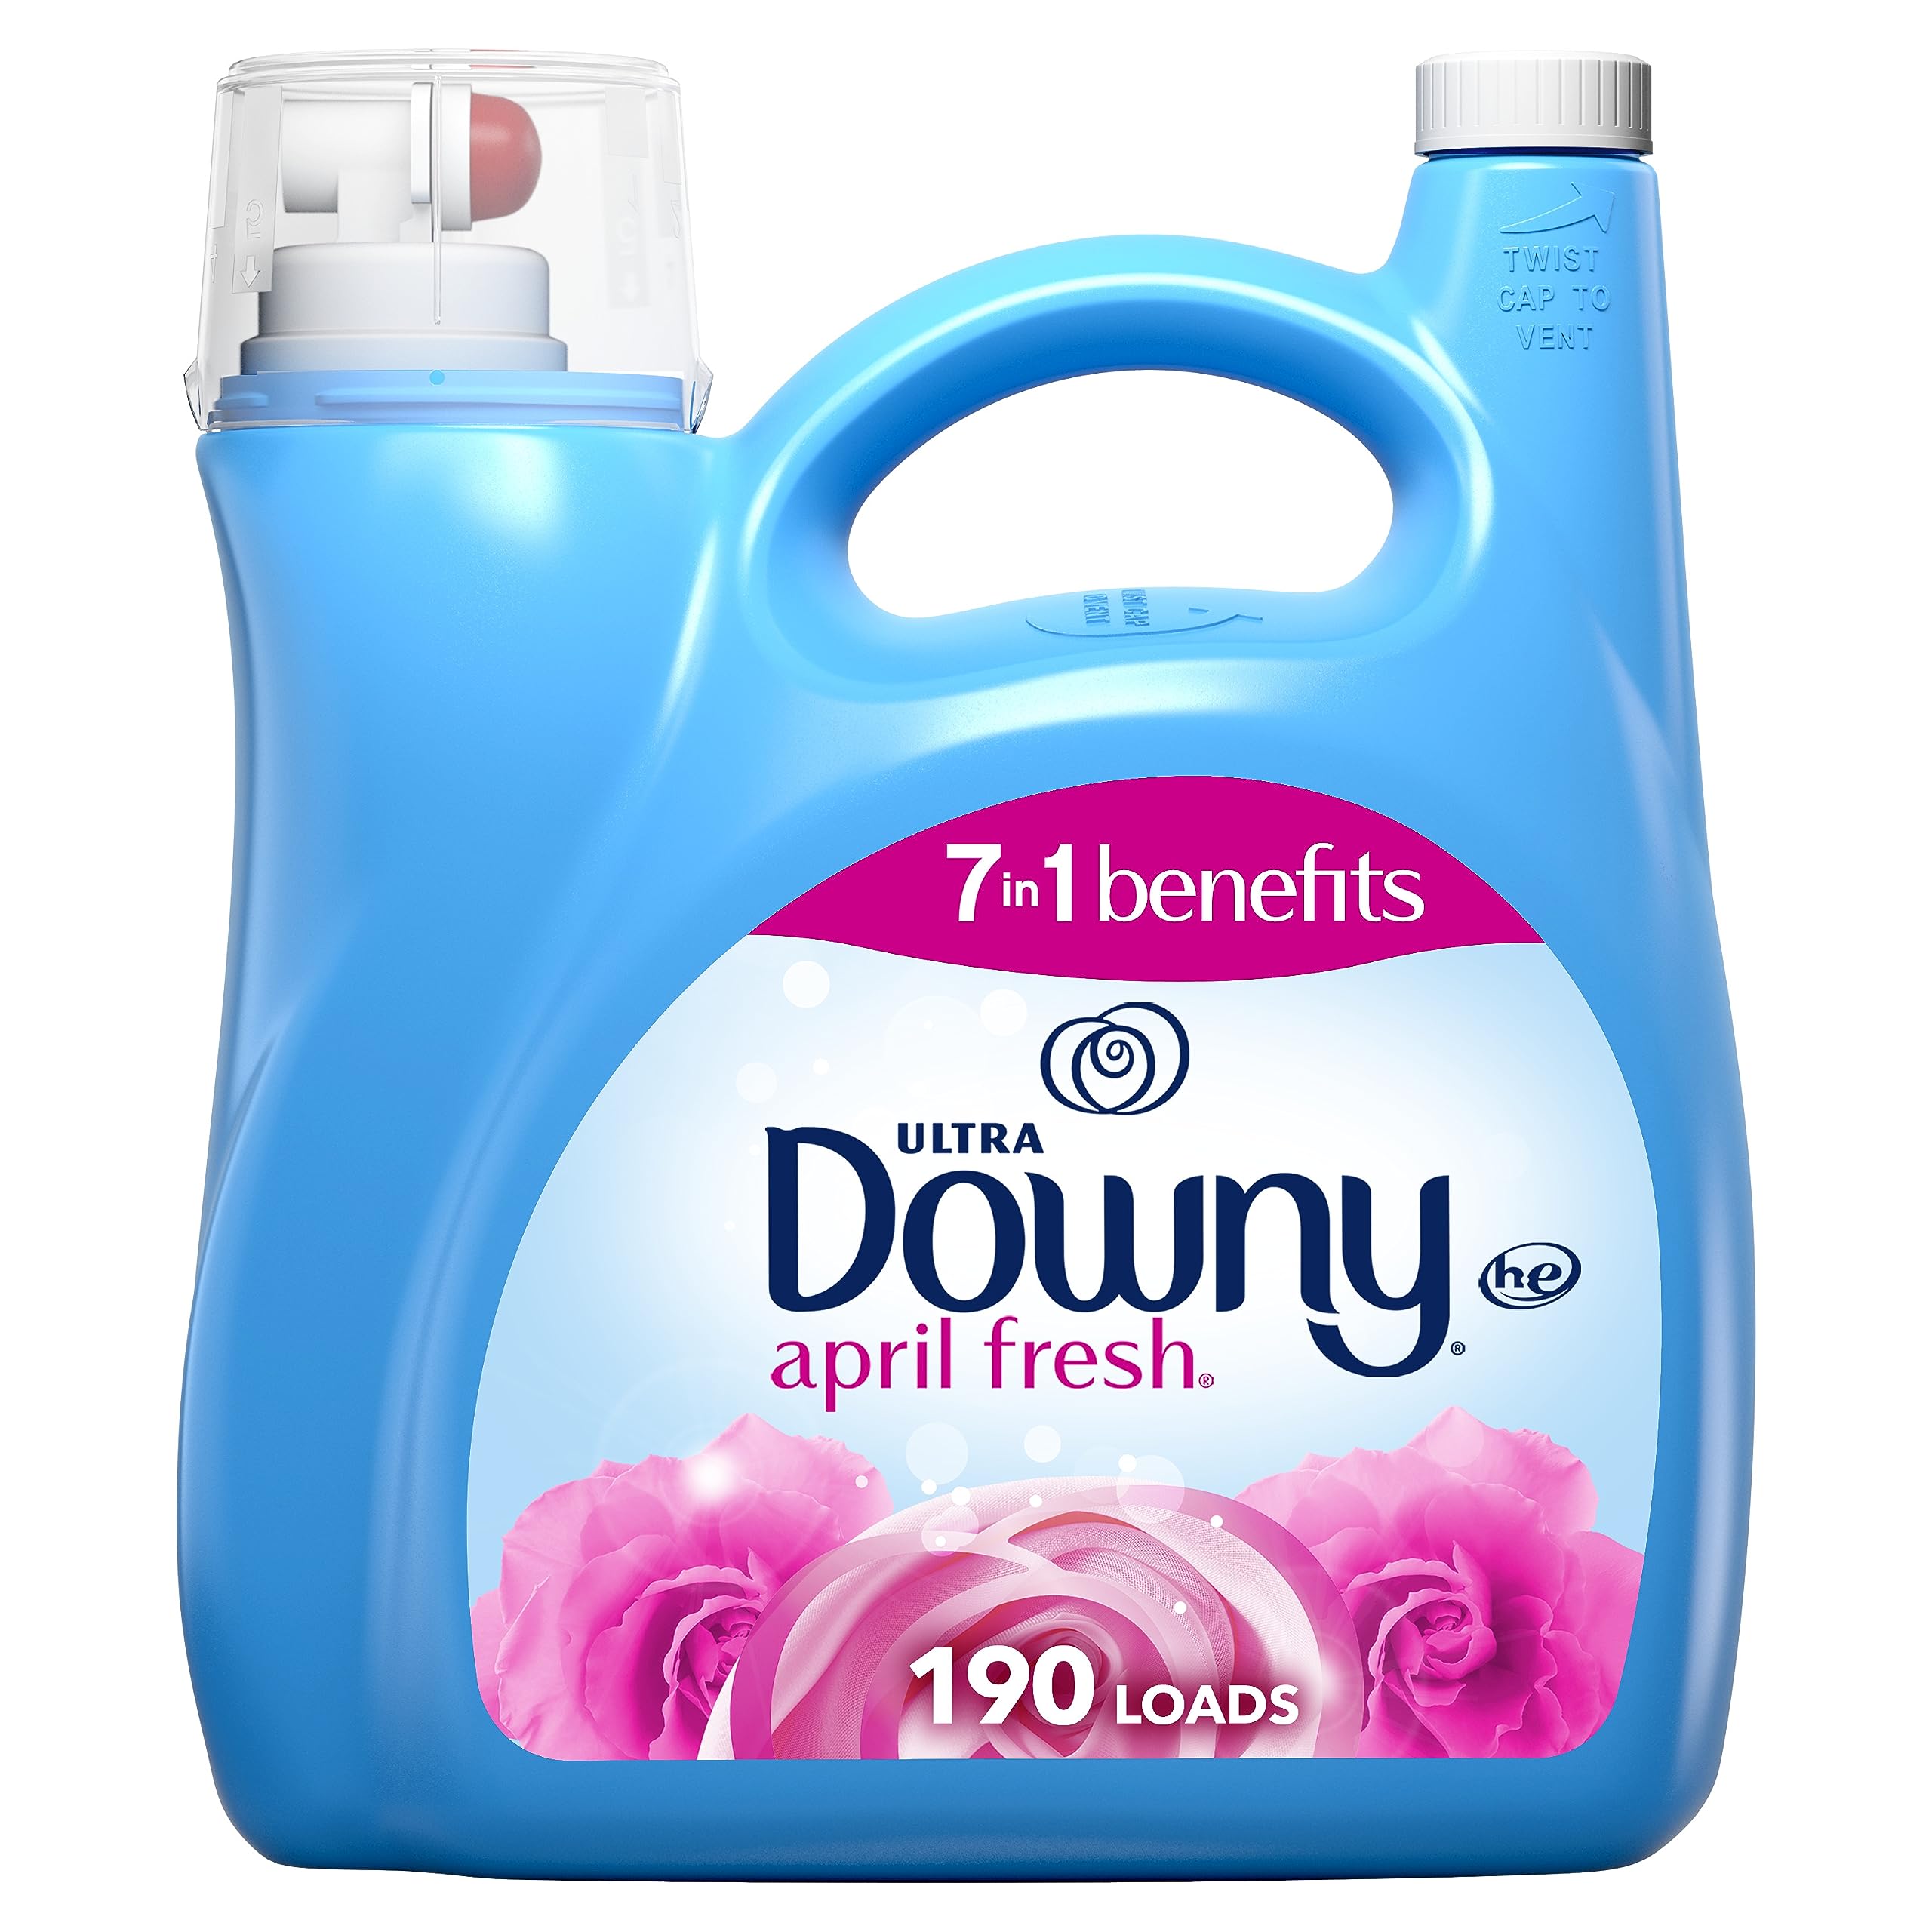 140-Oz Downy Liquid Fabric Softener (April Fresh) + $7 Amazon Credit $10.35 w/ S&S + Free Shipping w/ Prime or on $35+